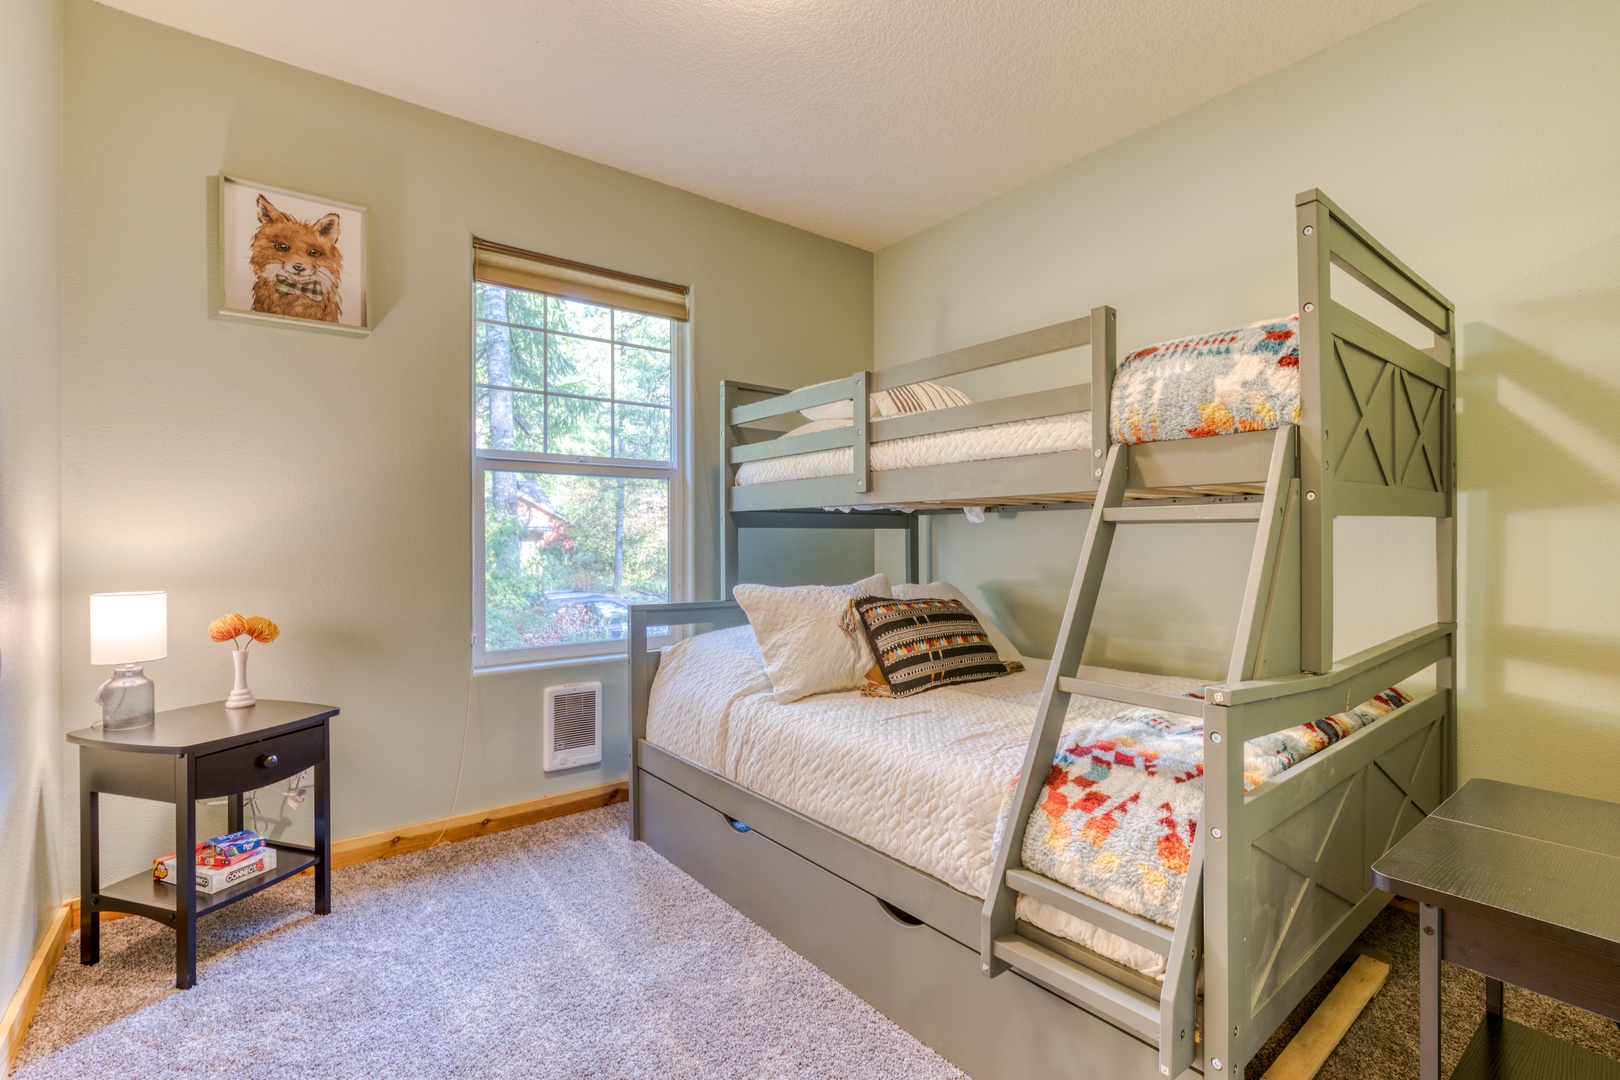 Brightwood Vacation Rentals, Riverside Retreat - Guest Bedroom 3 is perfect for those traveling with kids